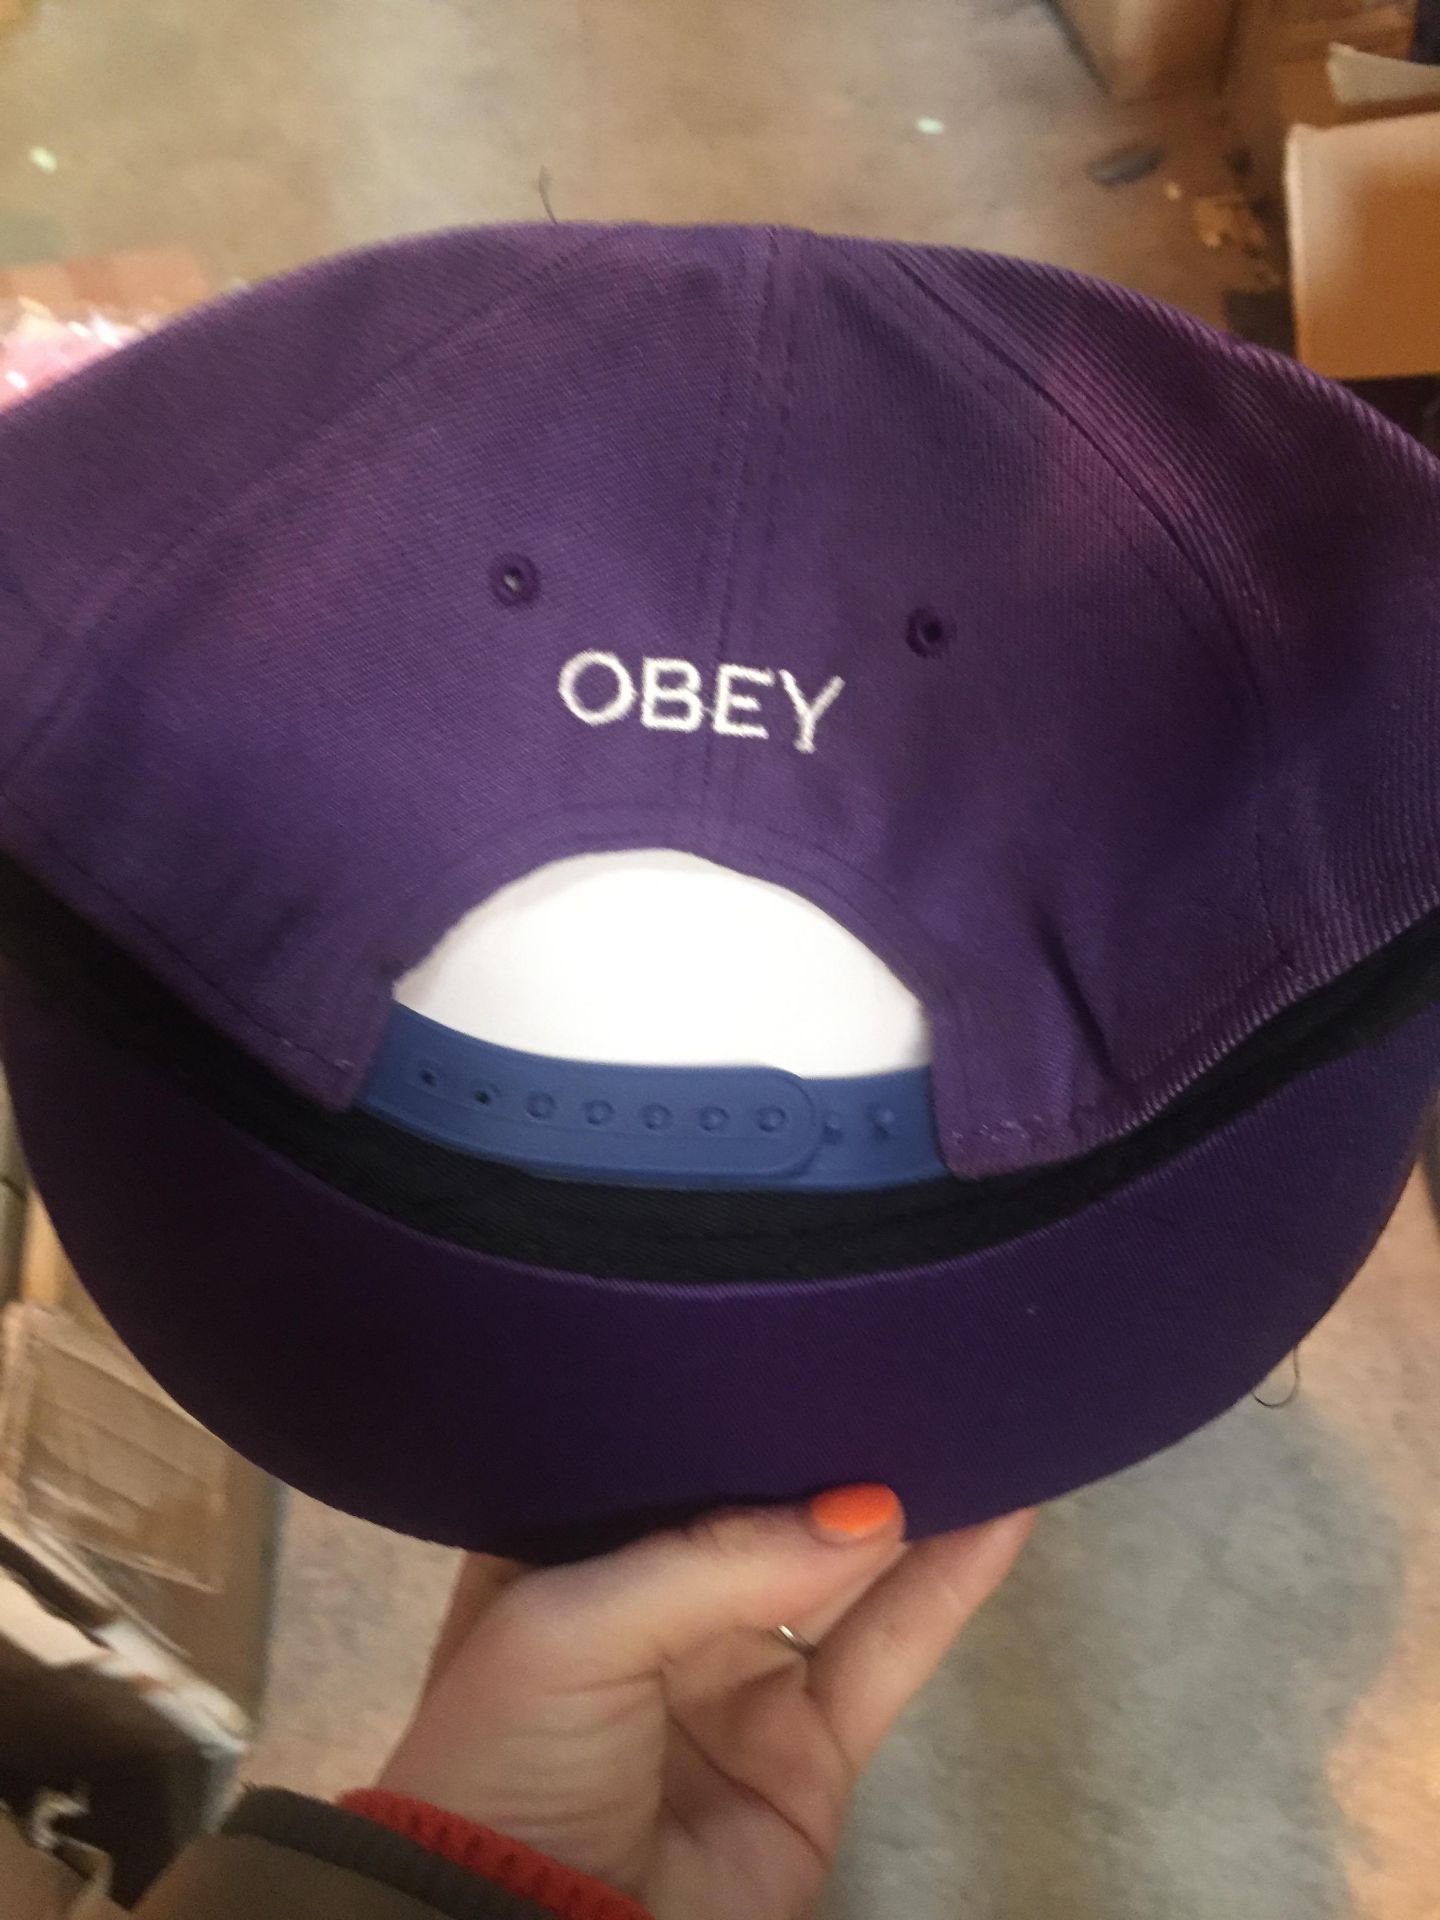 100 Purple Obey style hats - Image 3 of 4